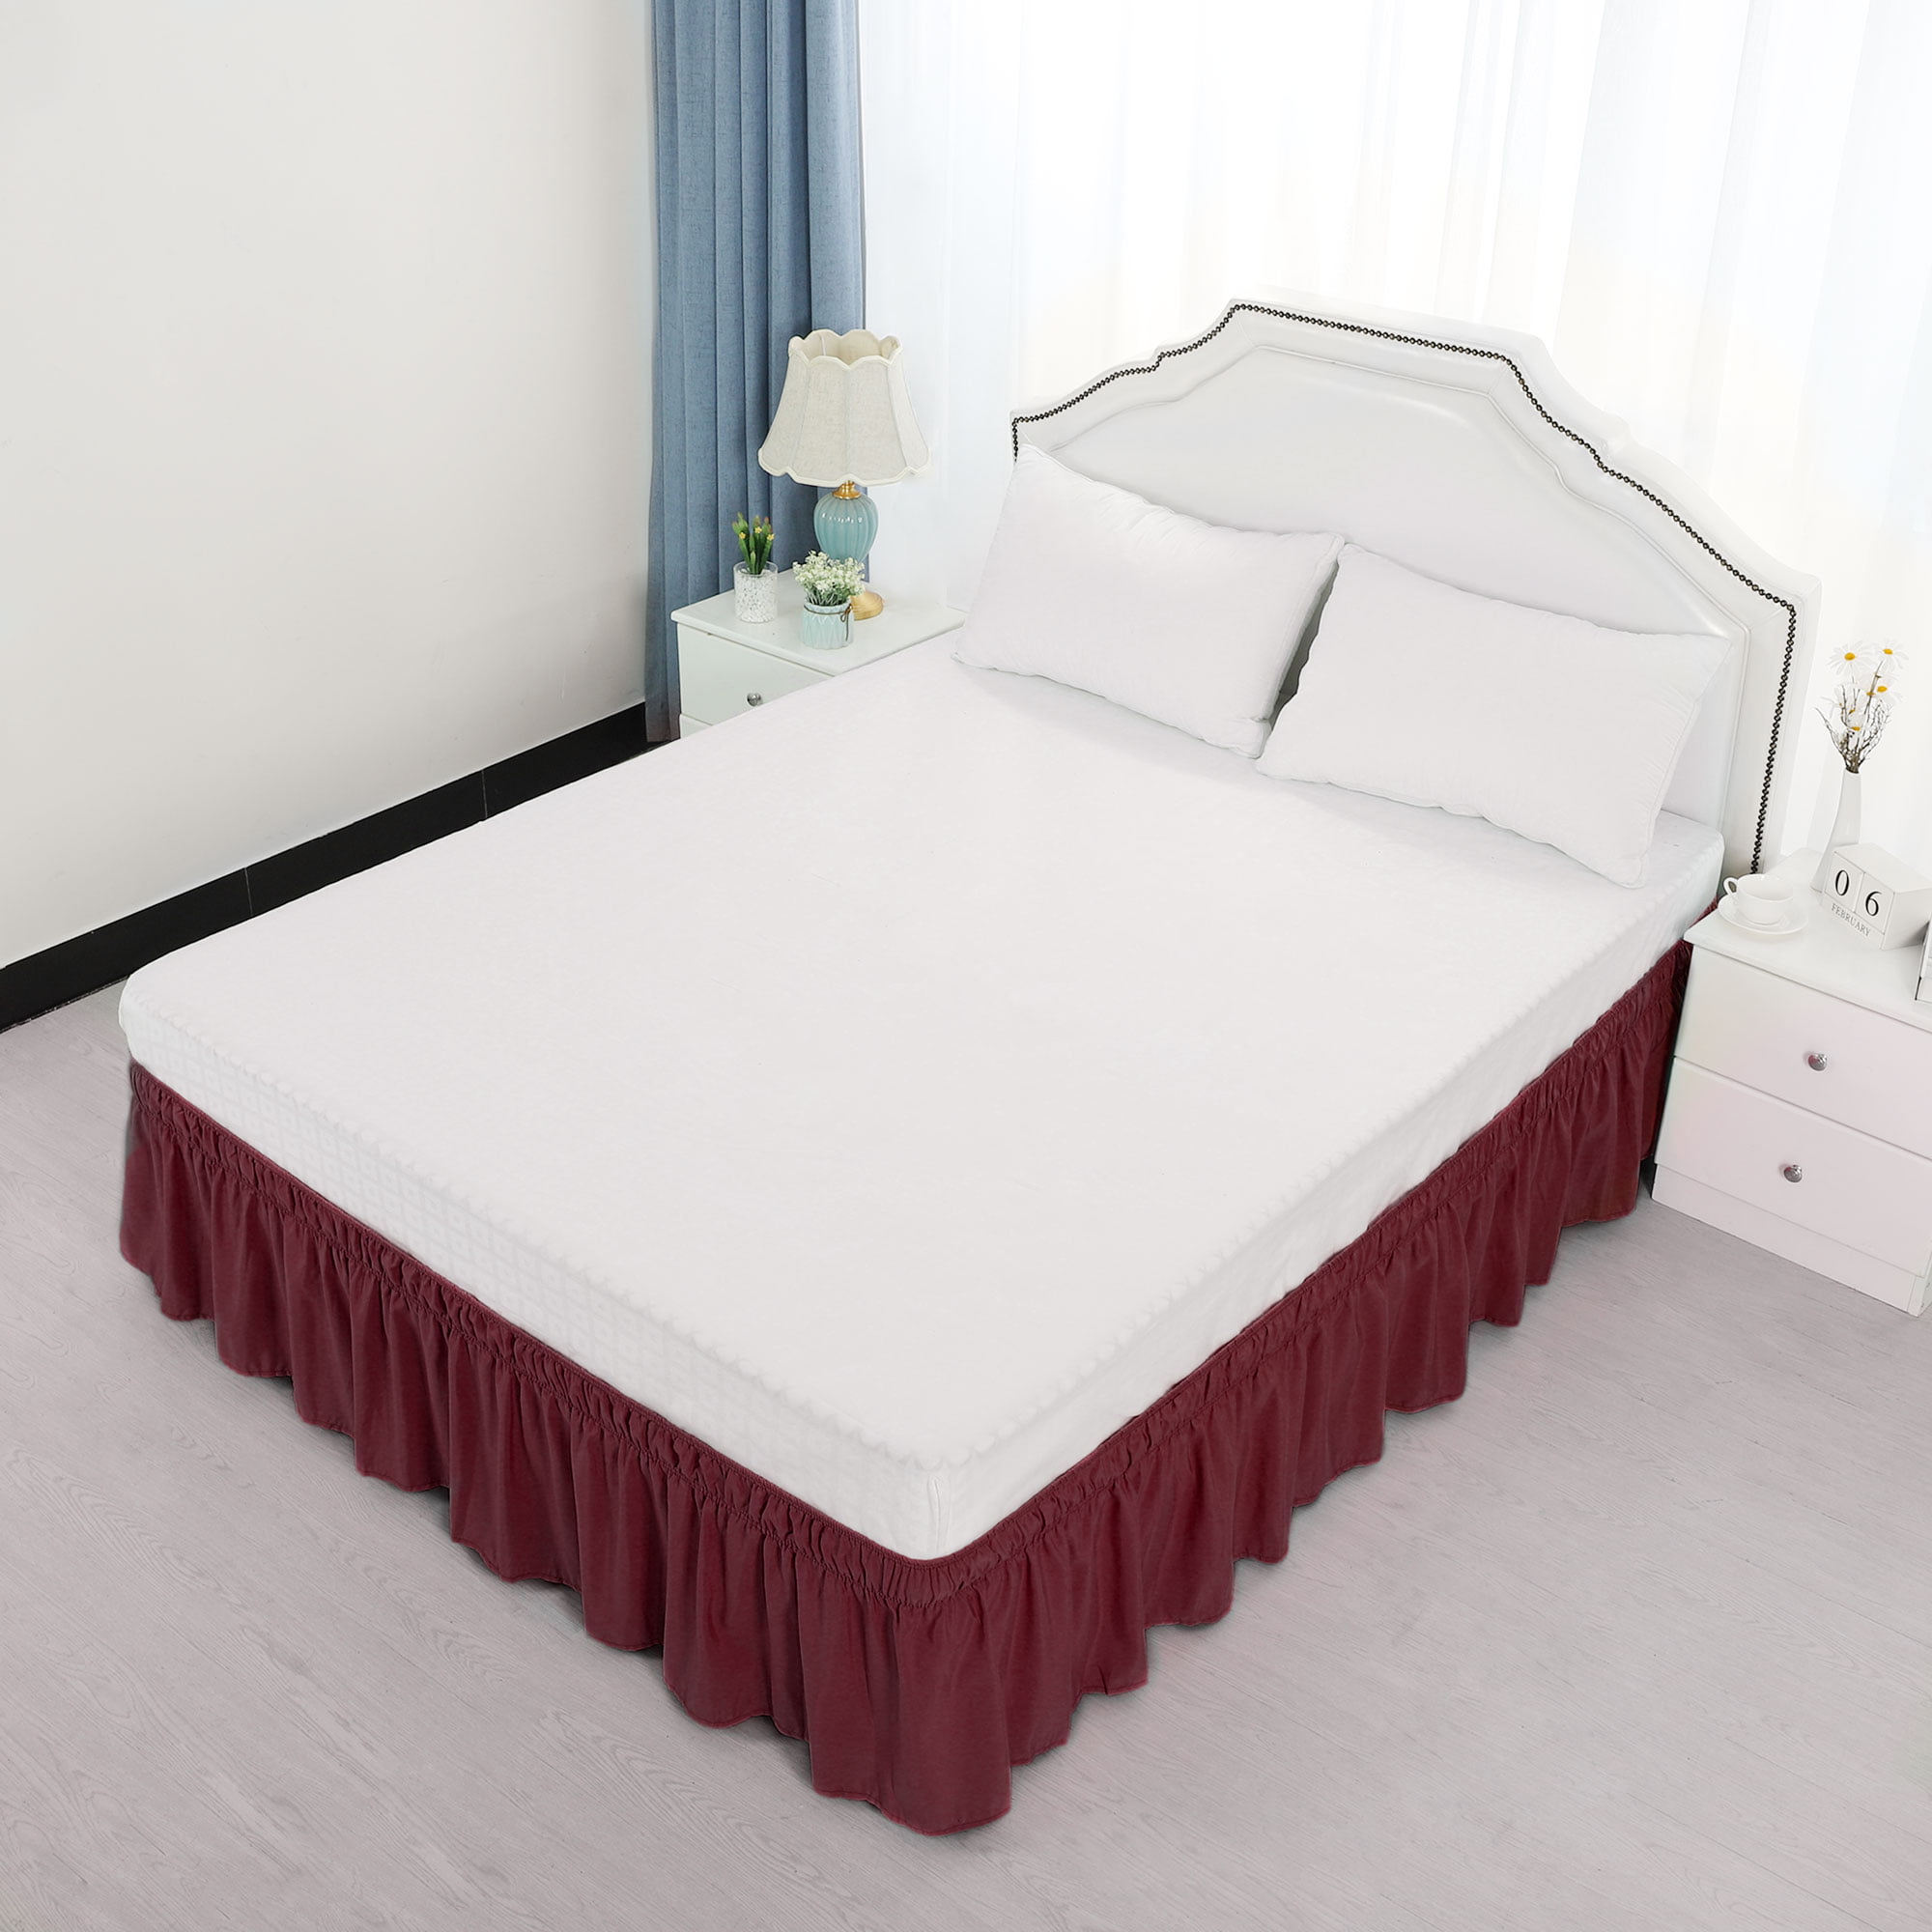 Small Double 30 Cm Drop 100% Cotton Bed Skirt Pleated Base Valance Bed Skirt Fits Under The Mattress & Down to The Floor Burgundy Pleated 